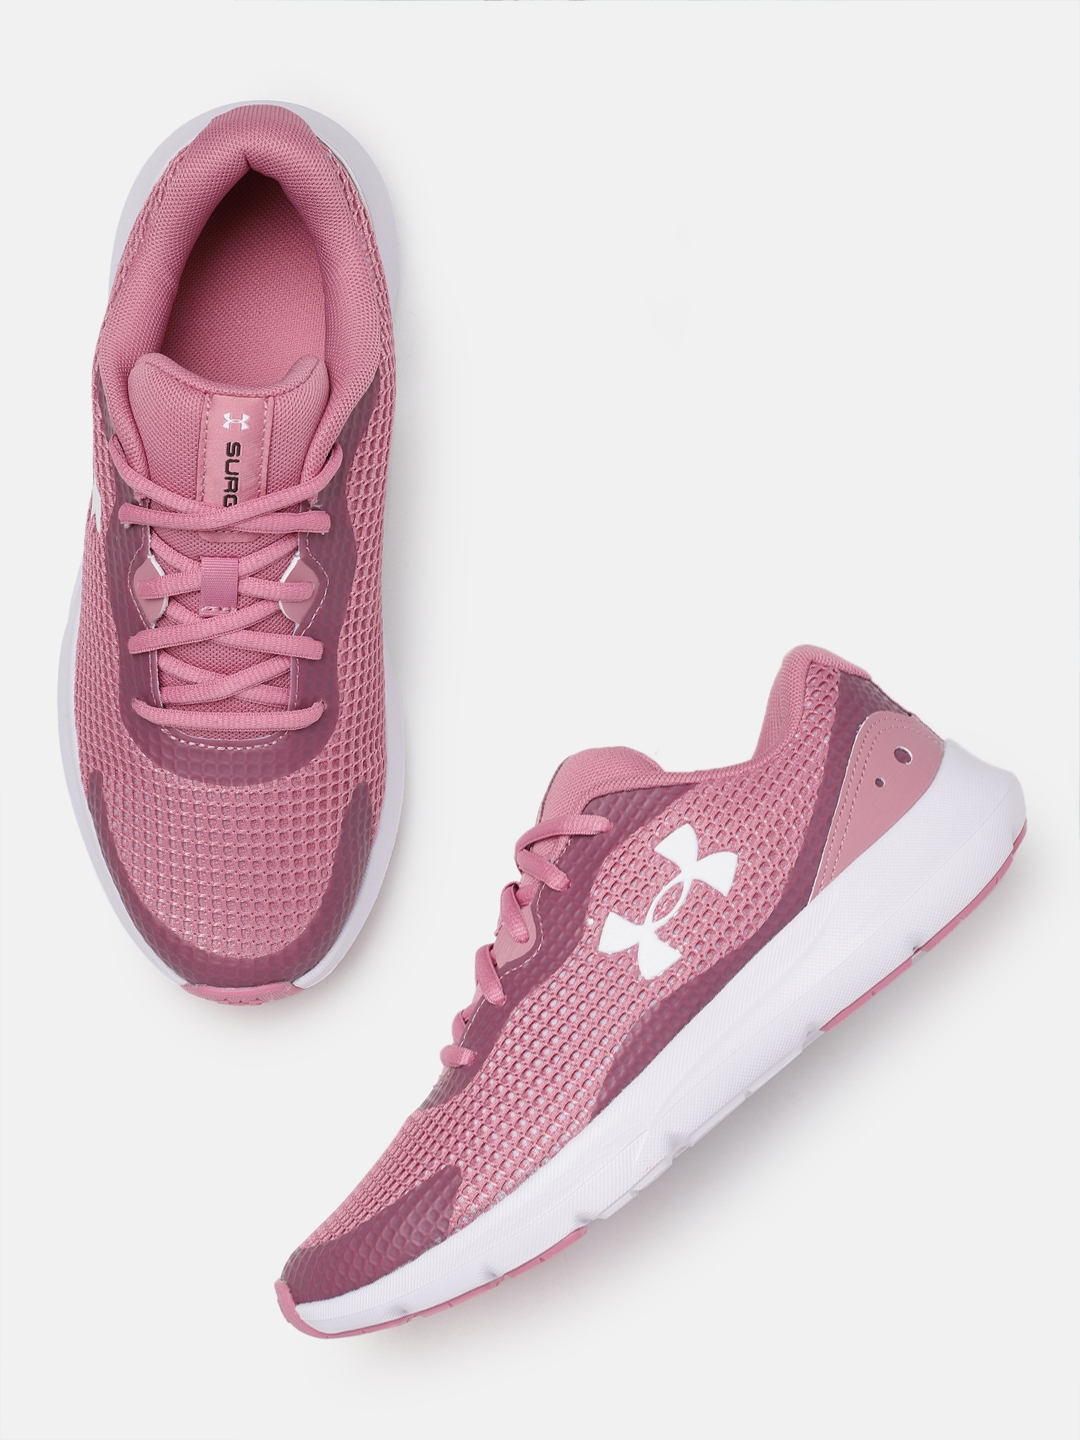 UNDER ARMOUR Women Surge 3 Running Shoes